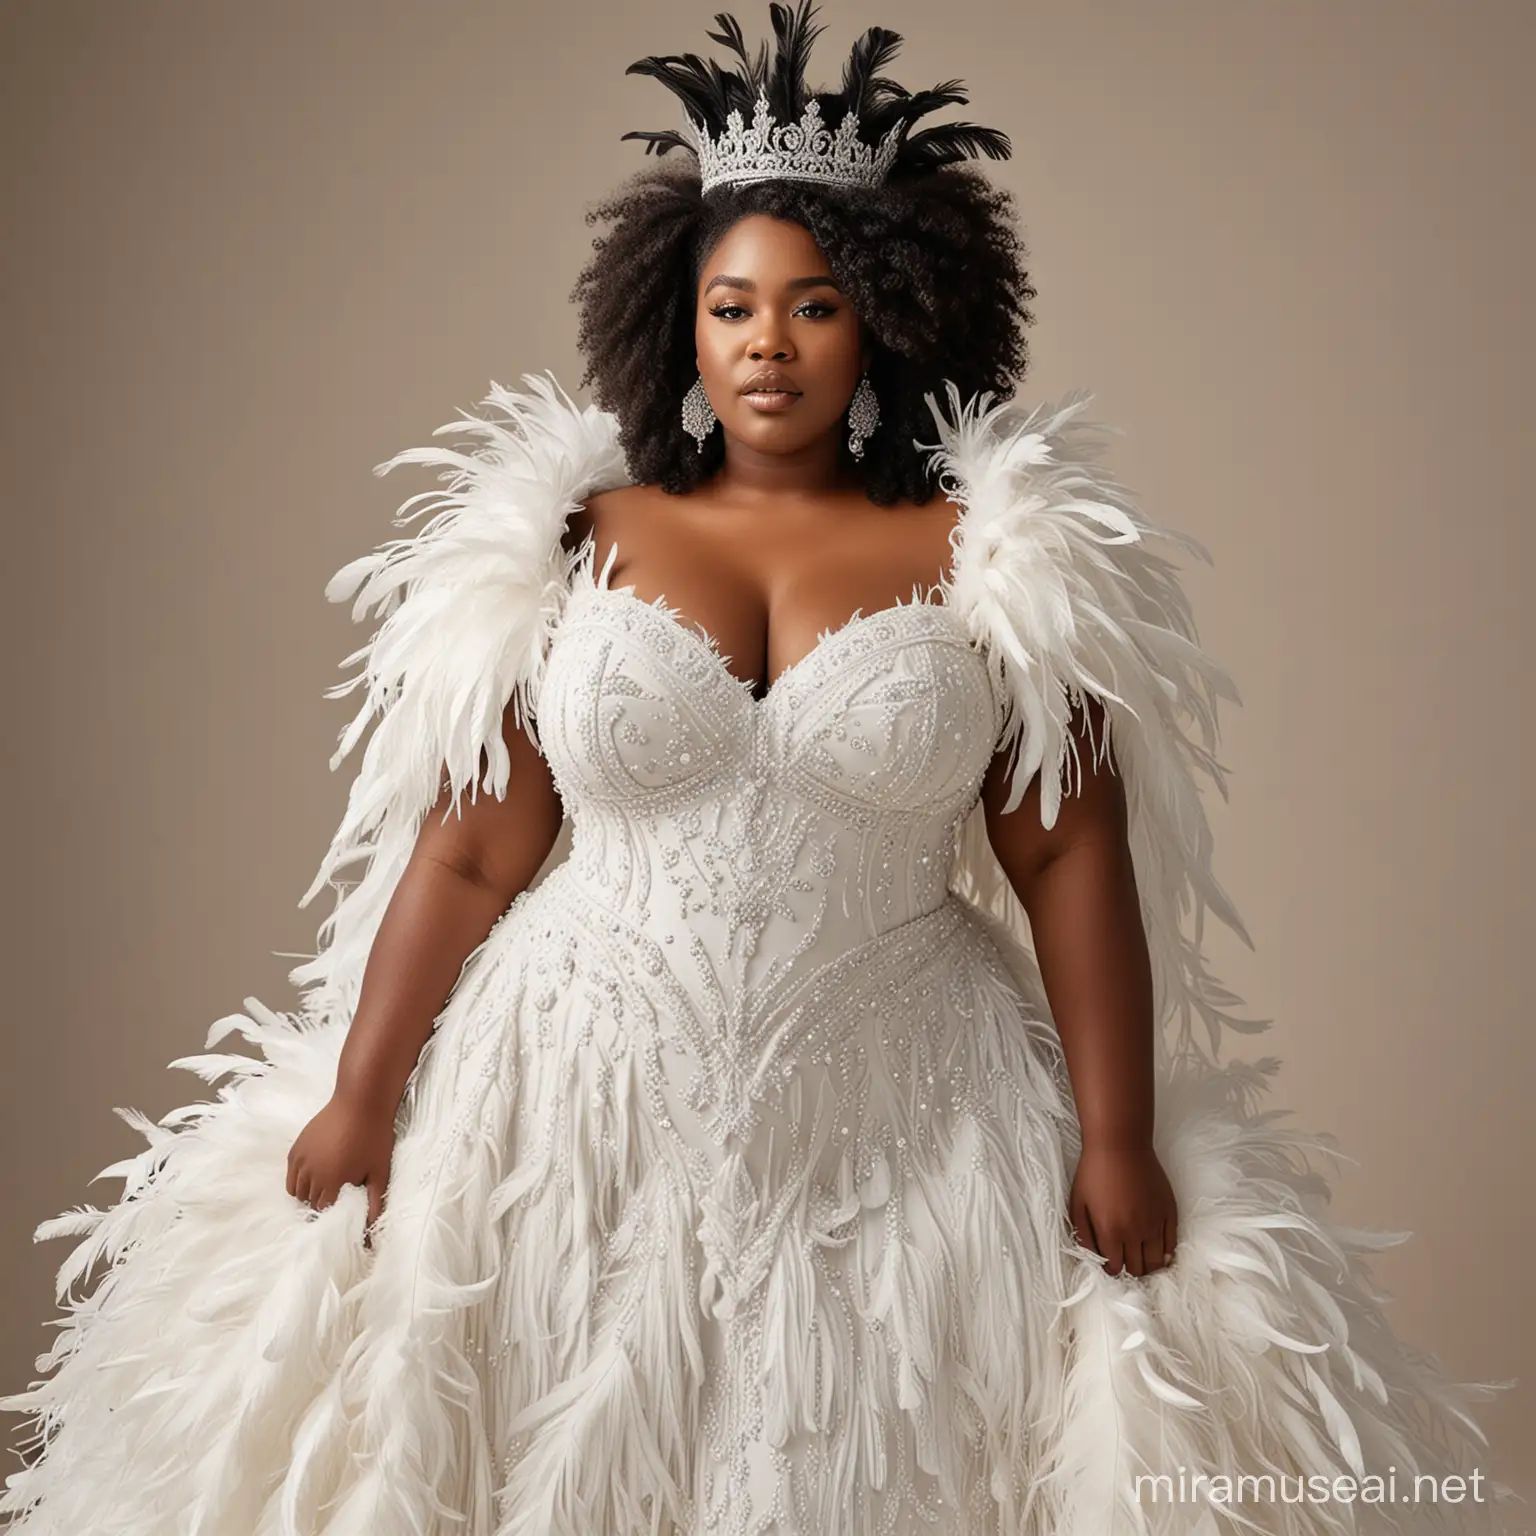 Plus size black woman in feathery wedding dress with crown